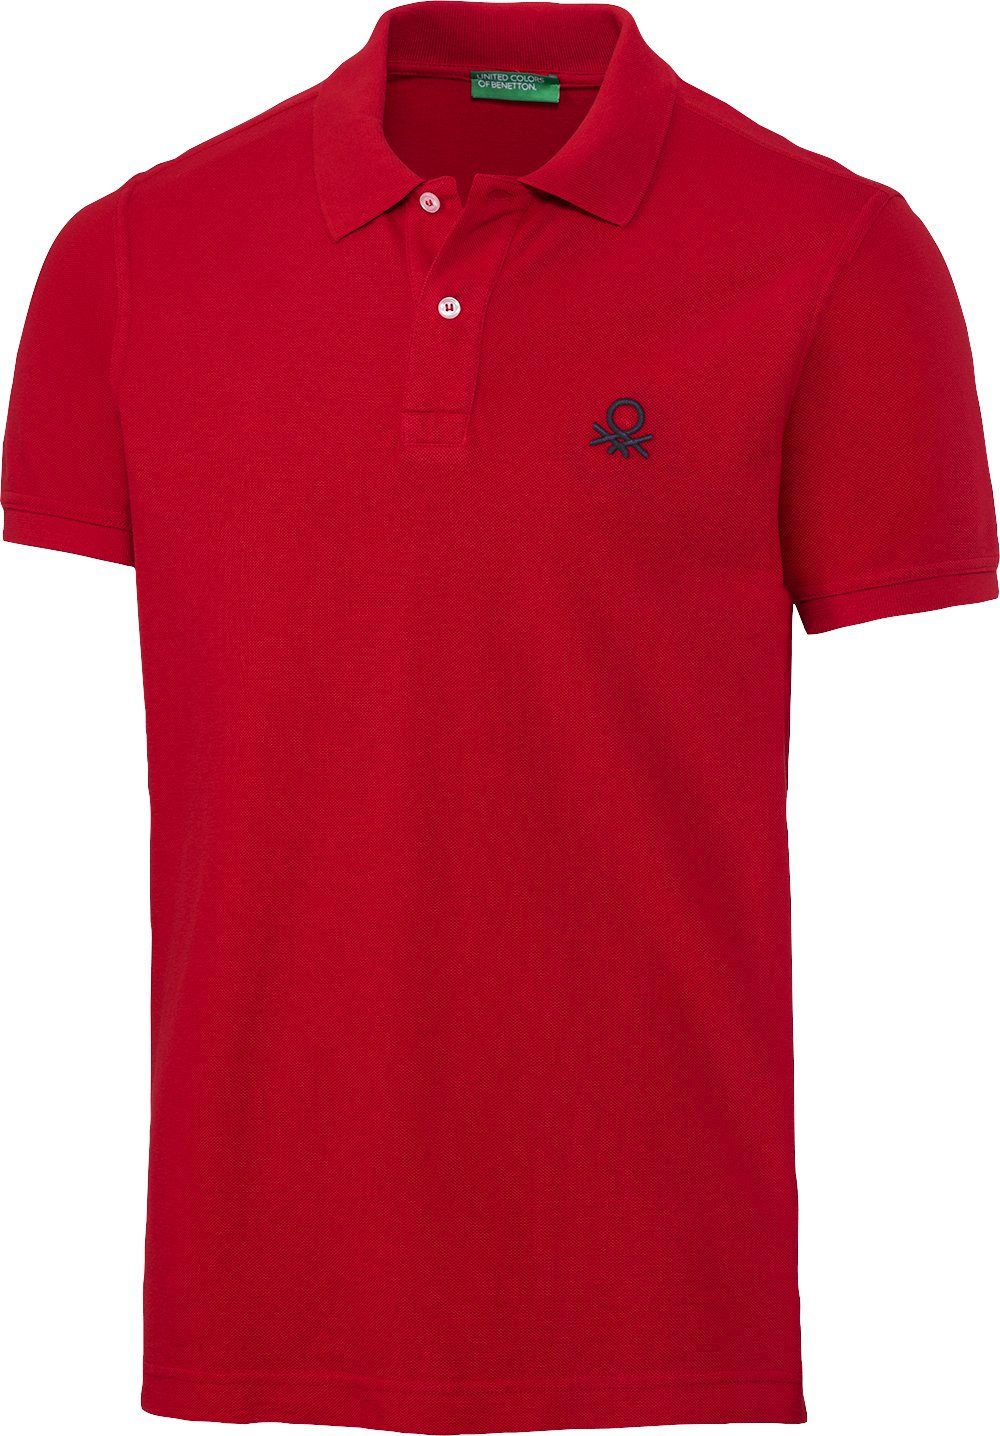 United Colors of Benetton Poloshirt aus Baumwolle rot